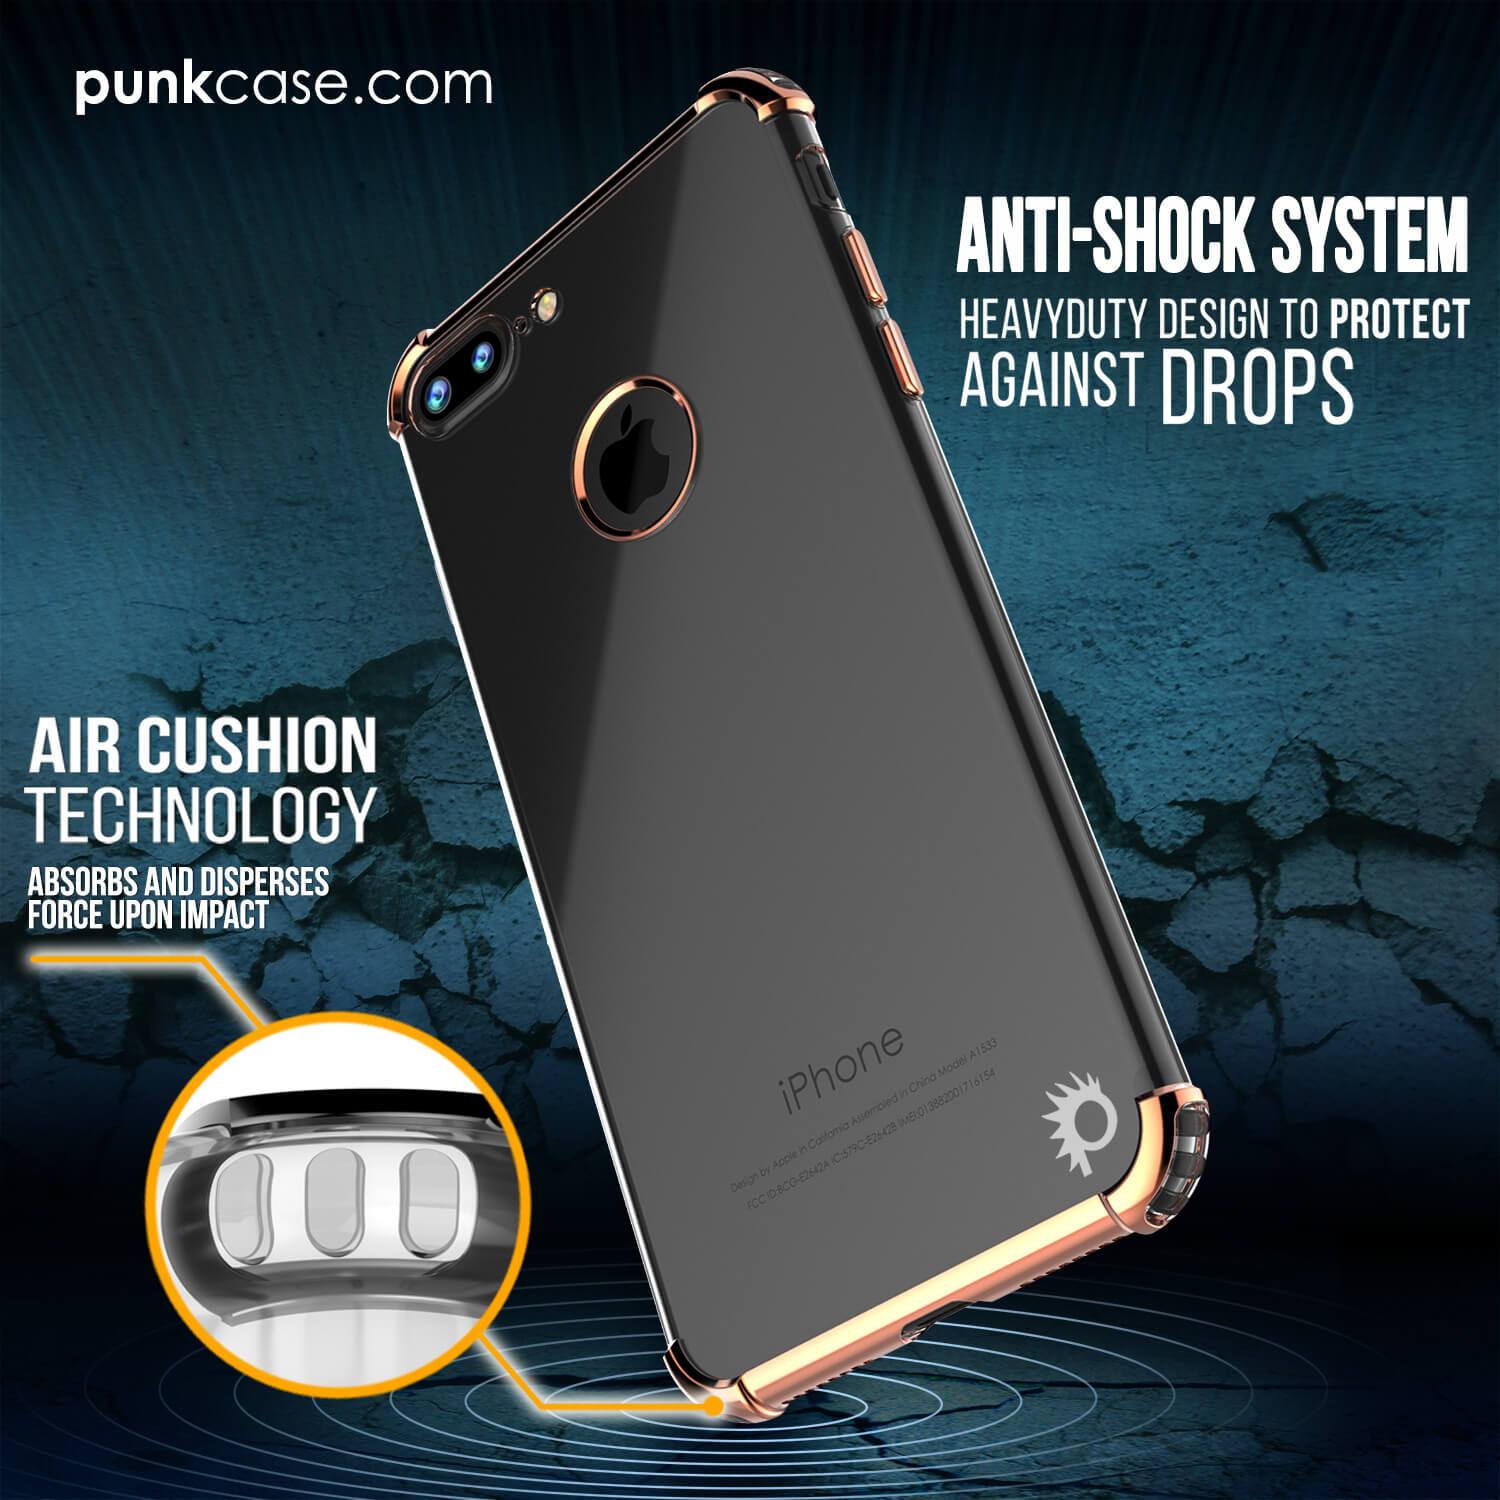 iPhone 7 PLUS Case, Punkcase [BLAZE RoseGold SERIES] Protective Cover W/ PunkShield Screen Protector